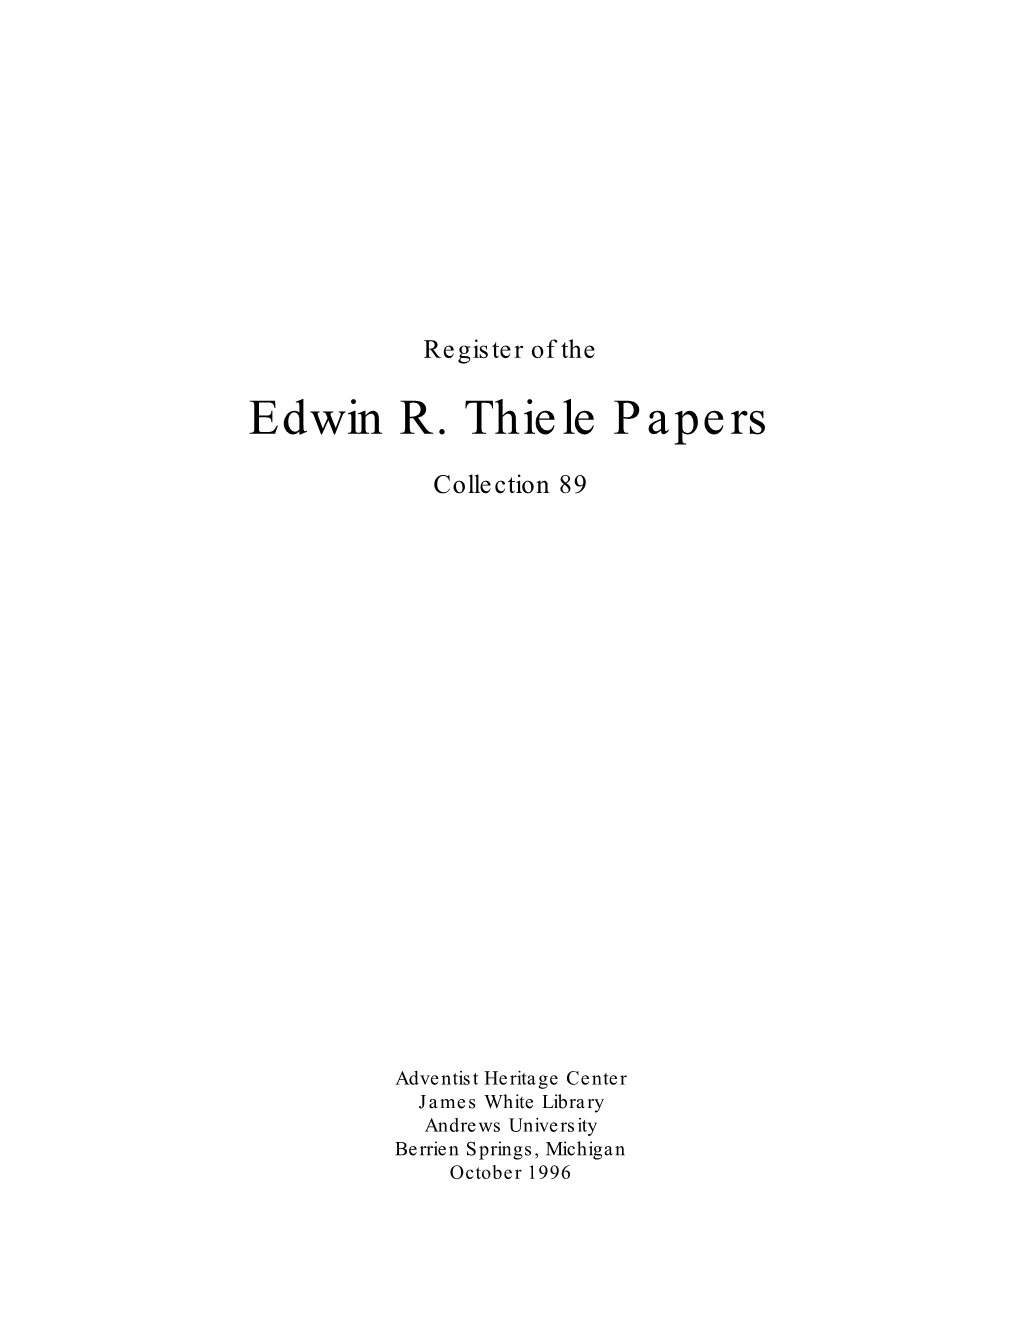 Edwin R. Thiele Papers